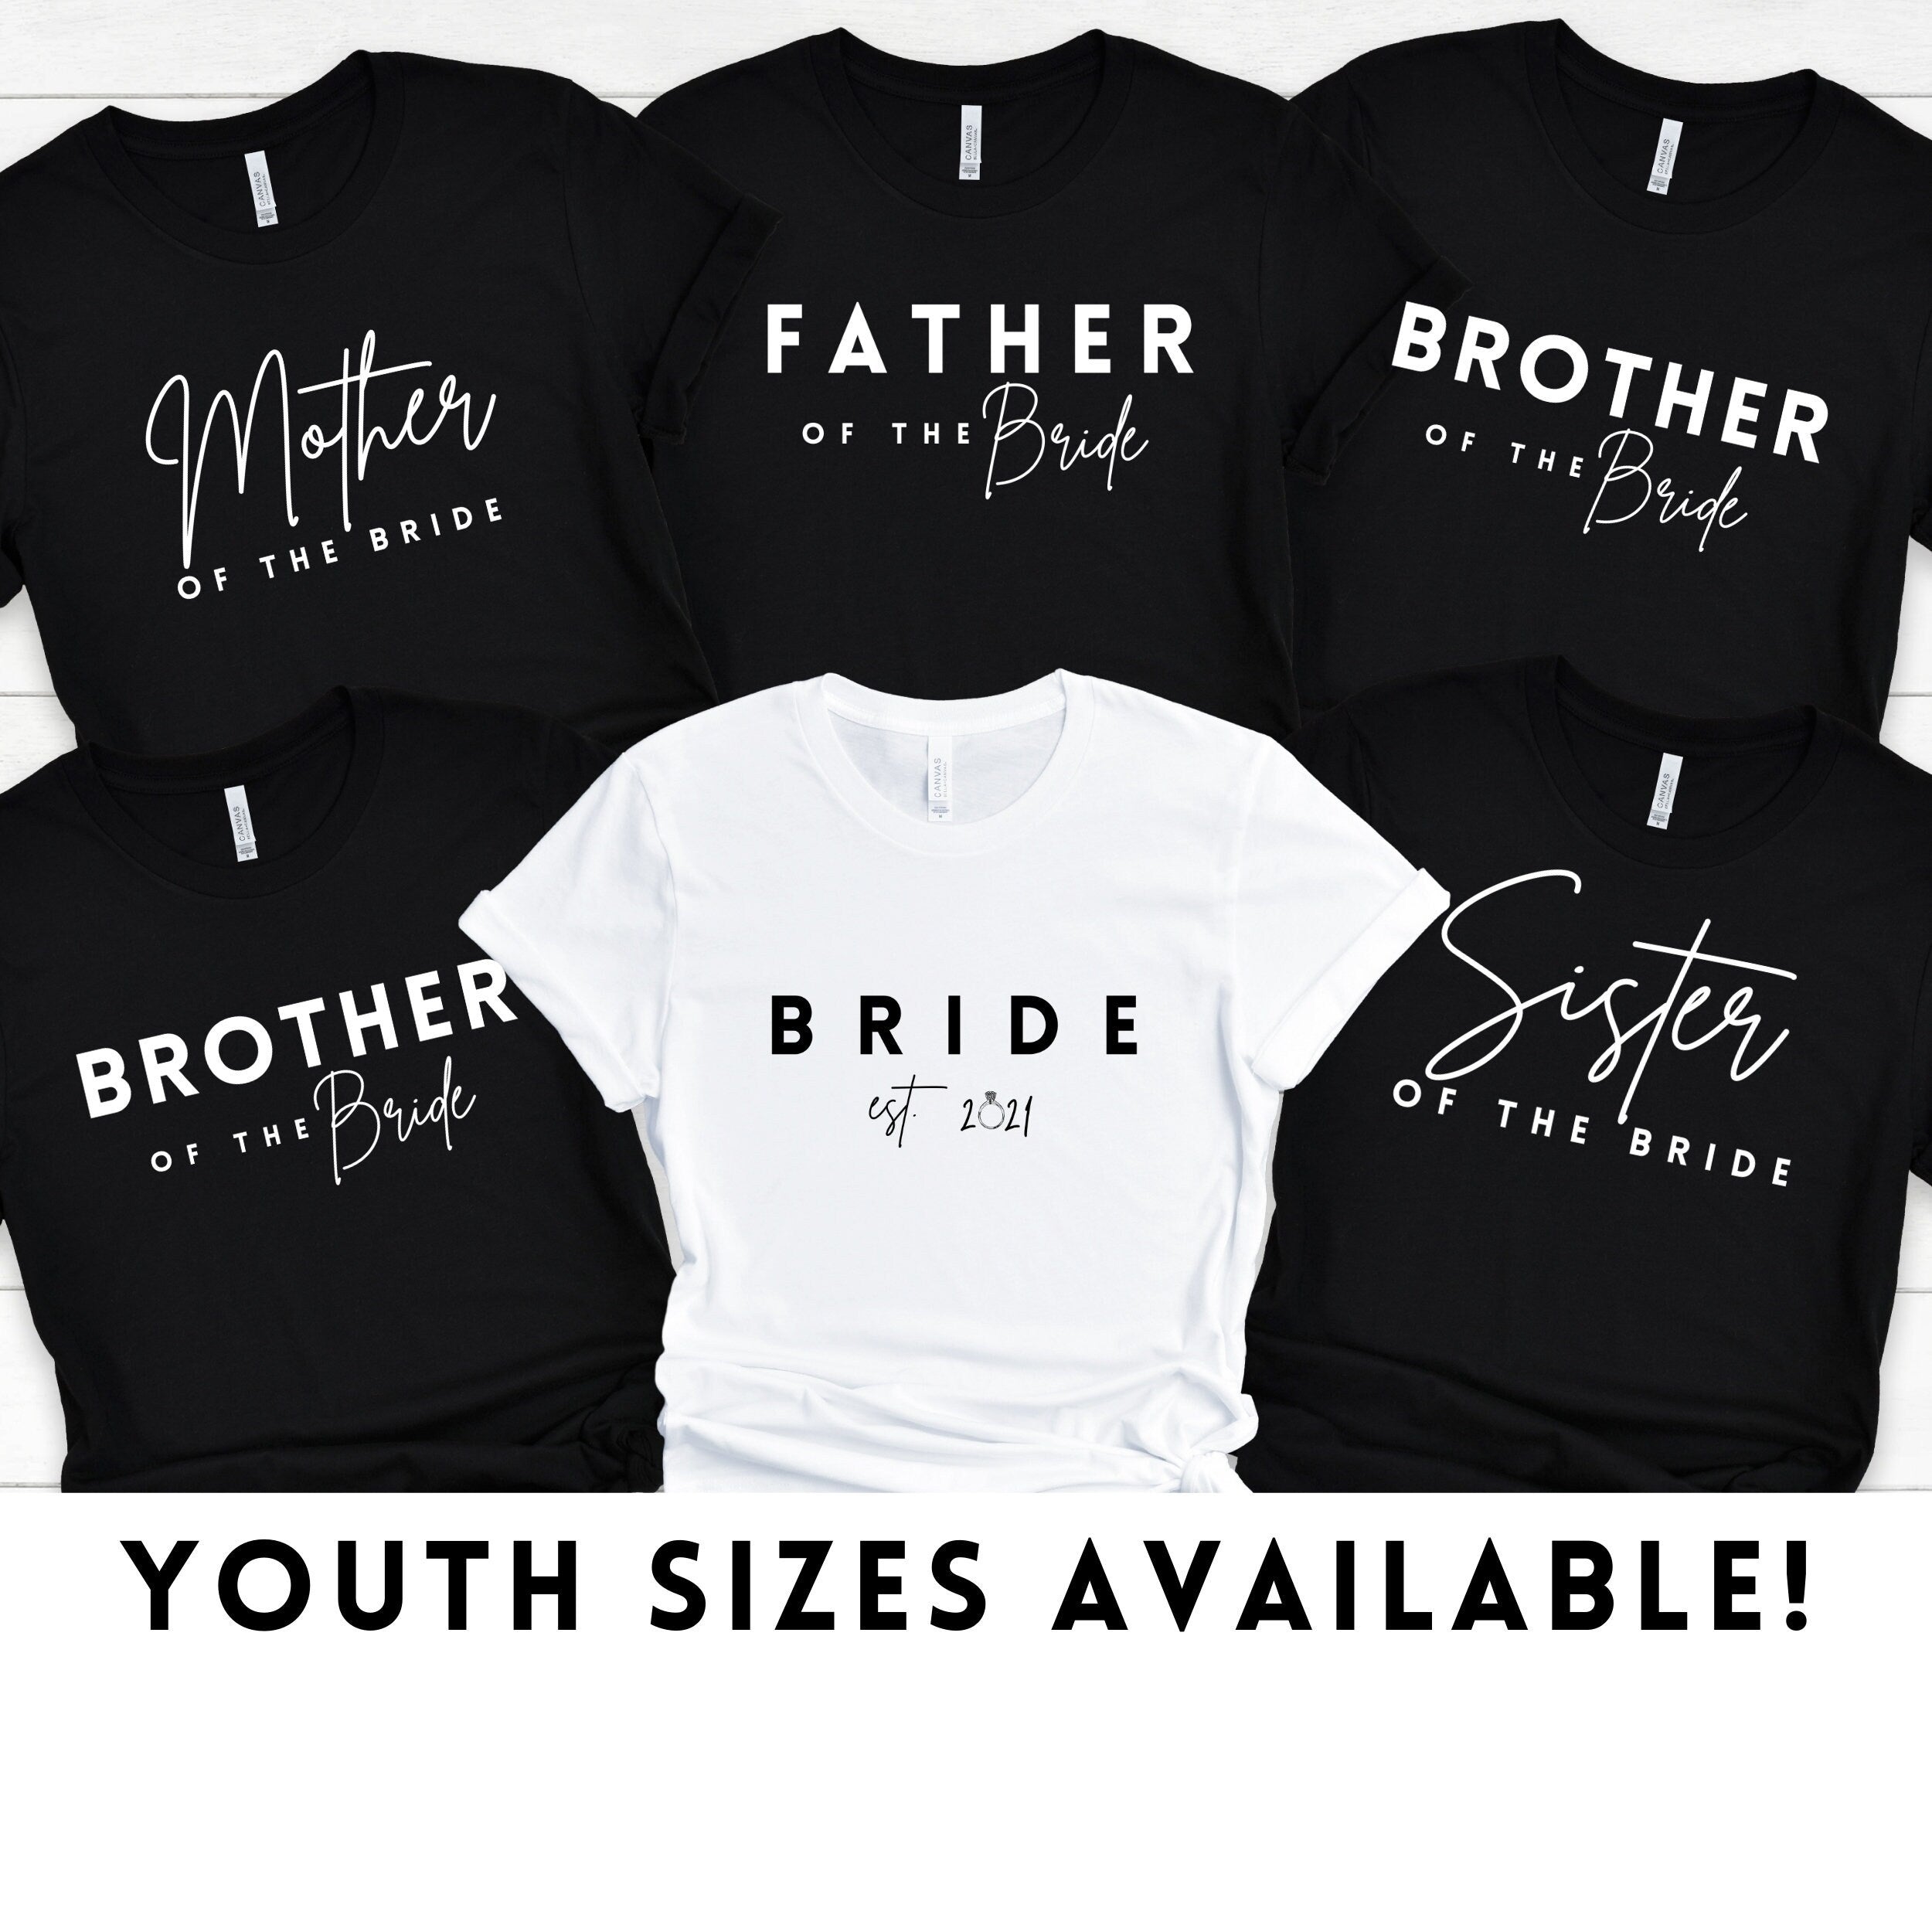 Family of the Bride Tee | Customized